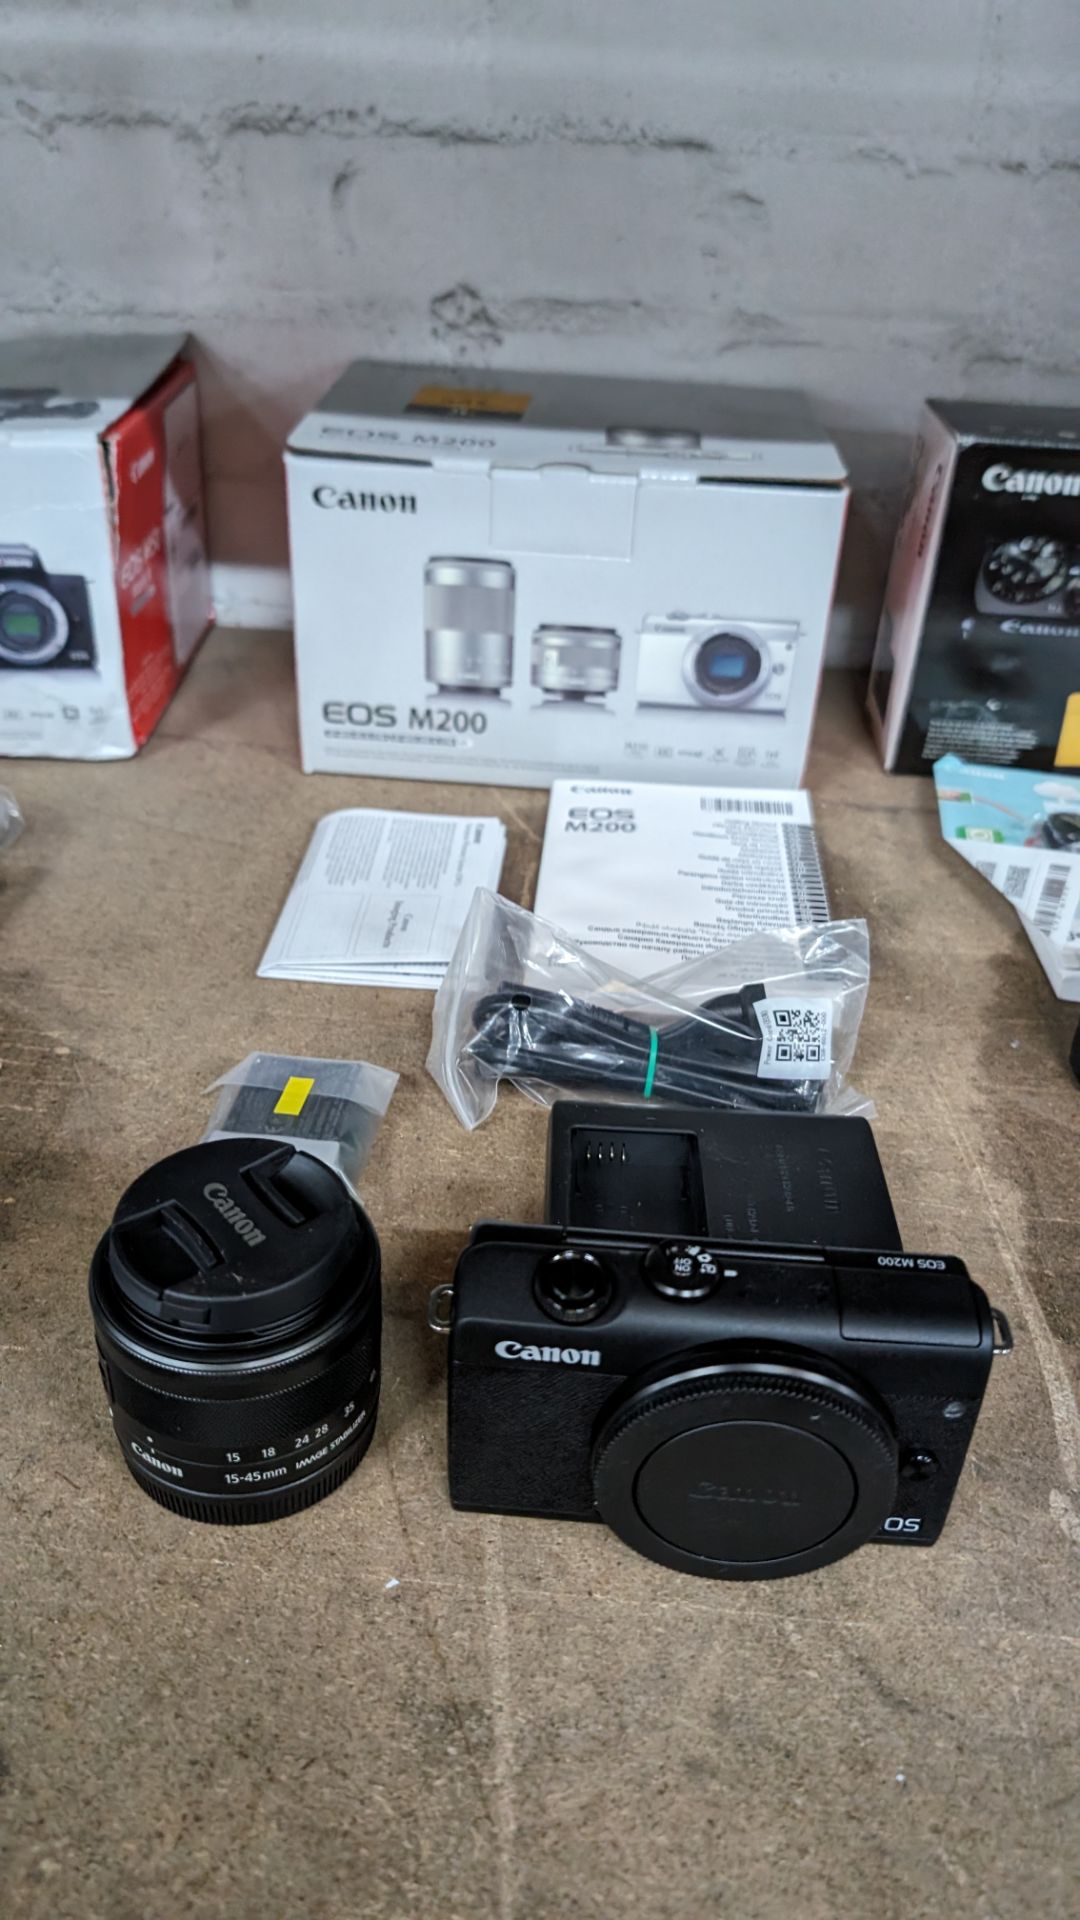 Canon EOS M200 camera kit, including 15-45mm image stabilizer lens, plus battery and charger - Image 2 of 12